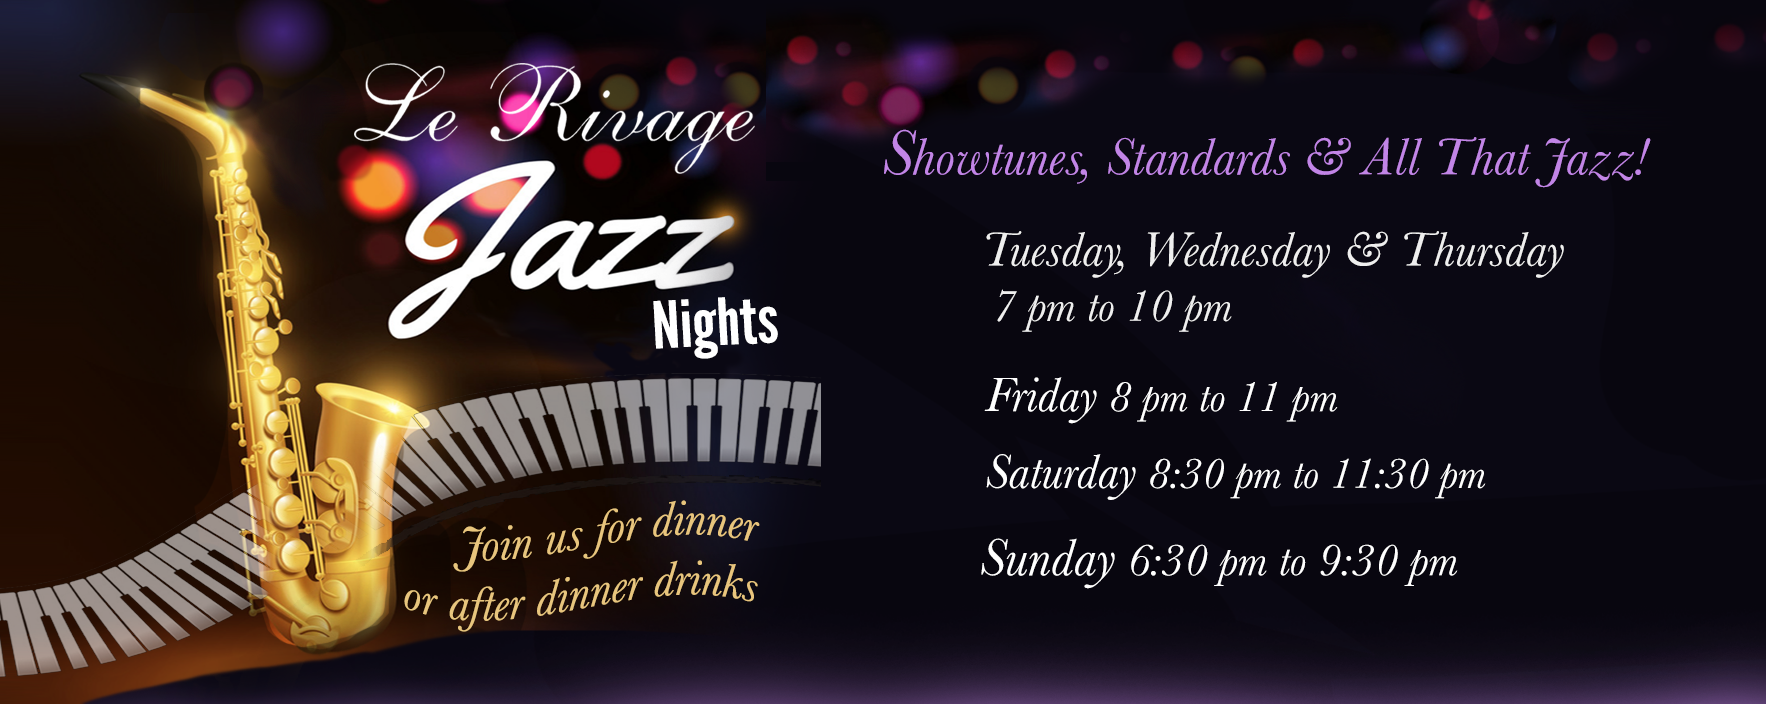 Jazz Nights at Le Rivage with Kyle Colina Quartet and Barrett Taylor. Join us for dinner and after dinner drinks on Tuesday & Wednesday from 6:30 PM to 9:30 PM, Thursday from 7 PM to 10 PM, Fridays from 8 PM to 11 PM and Saturdays from 8:30 PM to 11:30 PM. Sunday Jazz from 6:30 PM to 9:30 PM. Call (212) 765-7374 to make a reservation